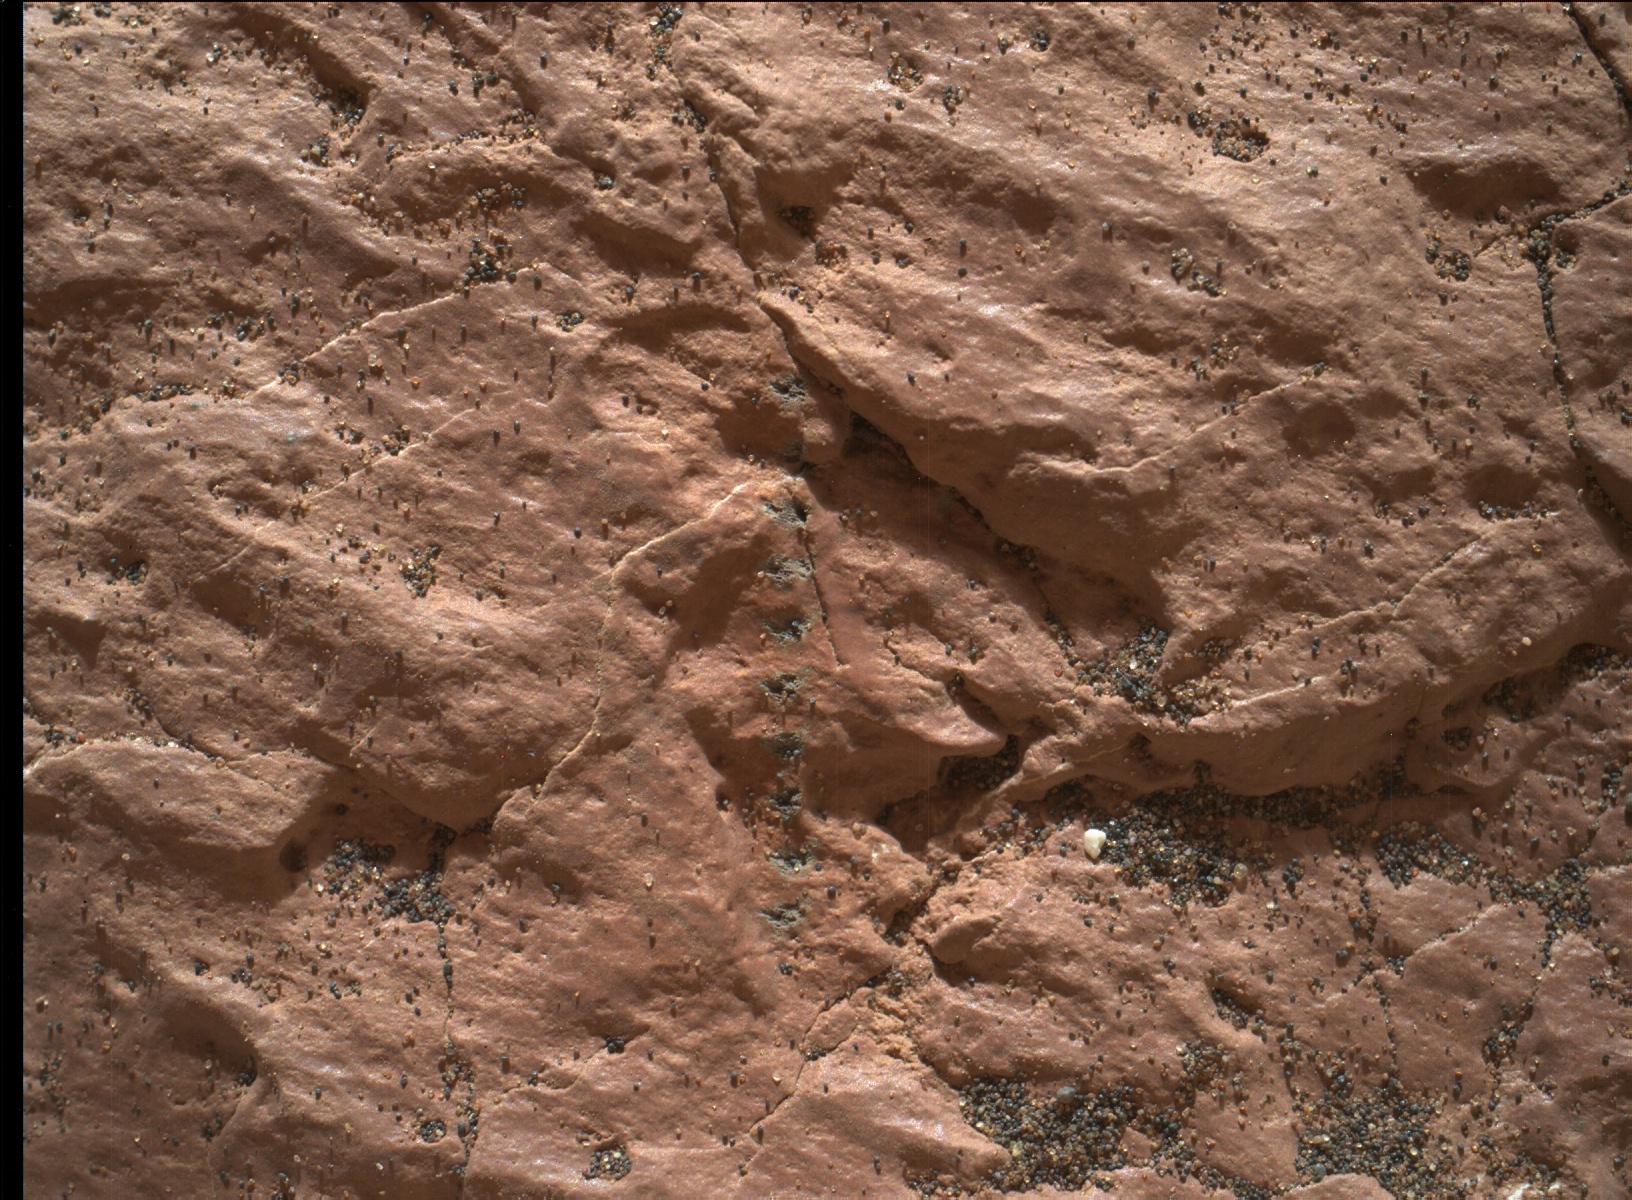 Nasa's Mars rover Curiosity acquired this image using its Mars Hand Lens Imager (MAHLI) on Sol 1606